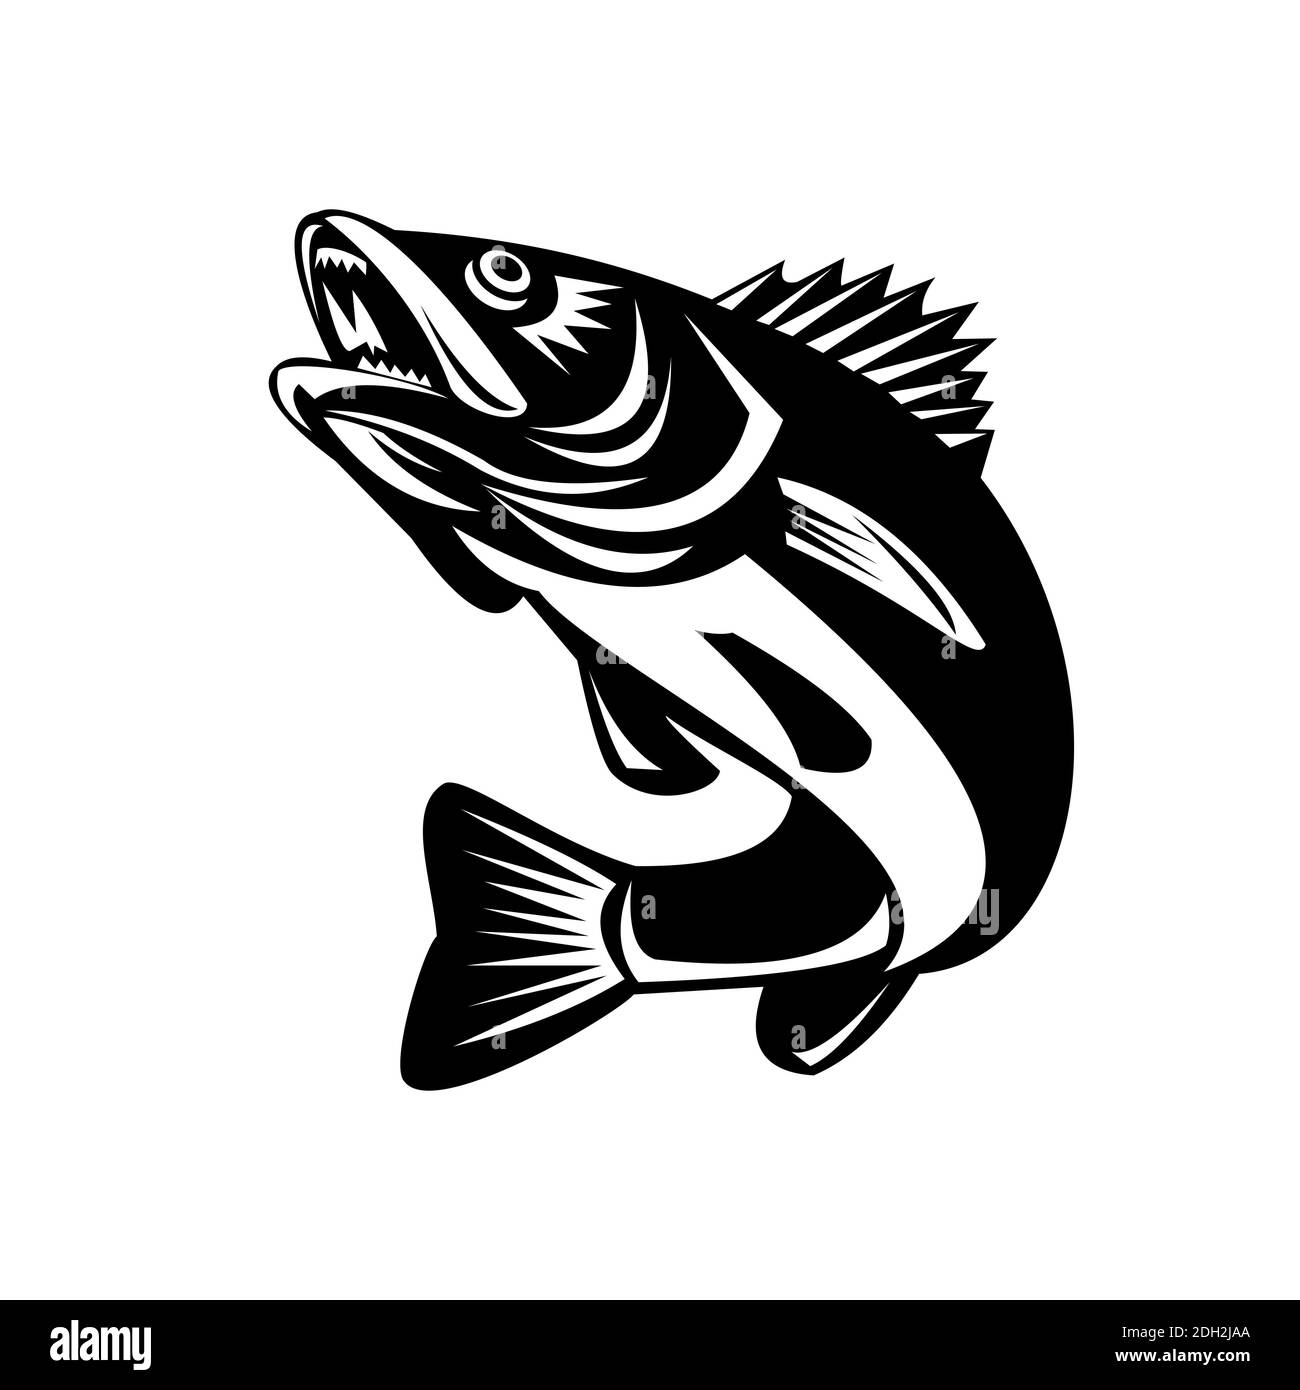 Walleye Fish Jumping Isolated Black and White Retro Stock Photo